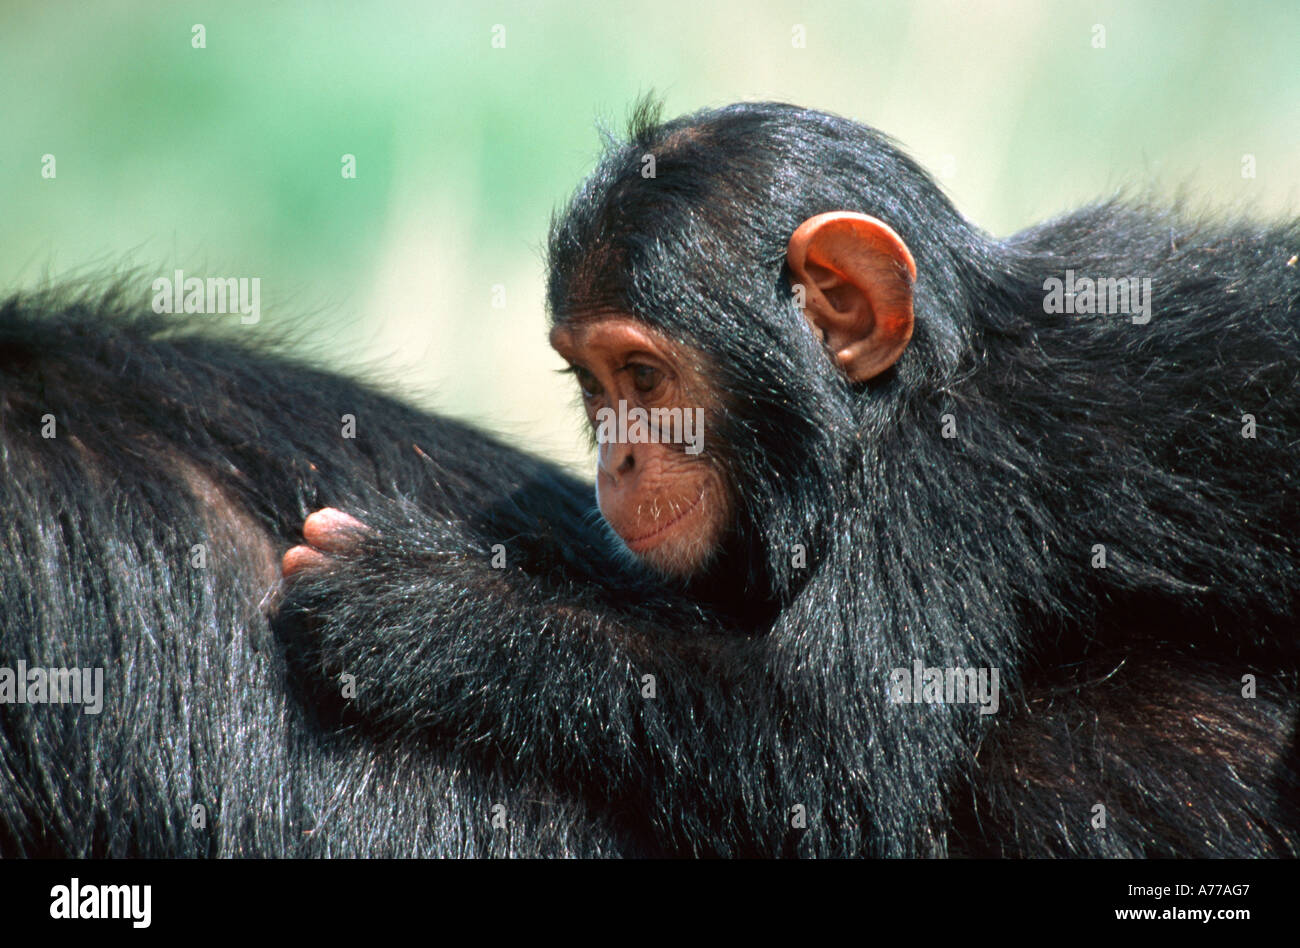 An infant common chimpanzee having a piggy back ride on an adult's back. Stock Photo